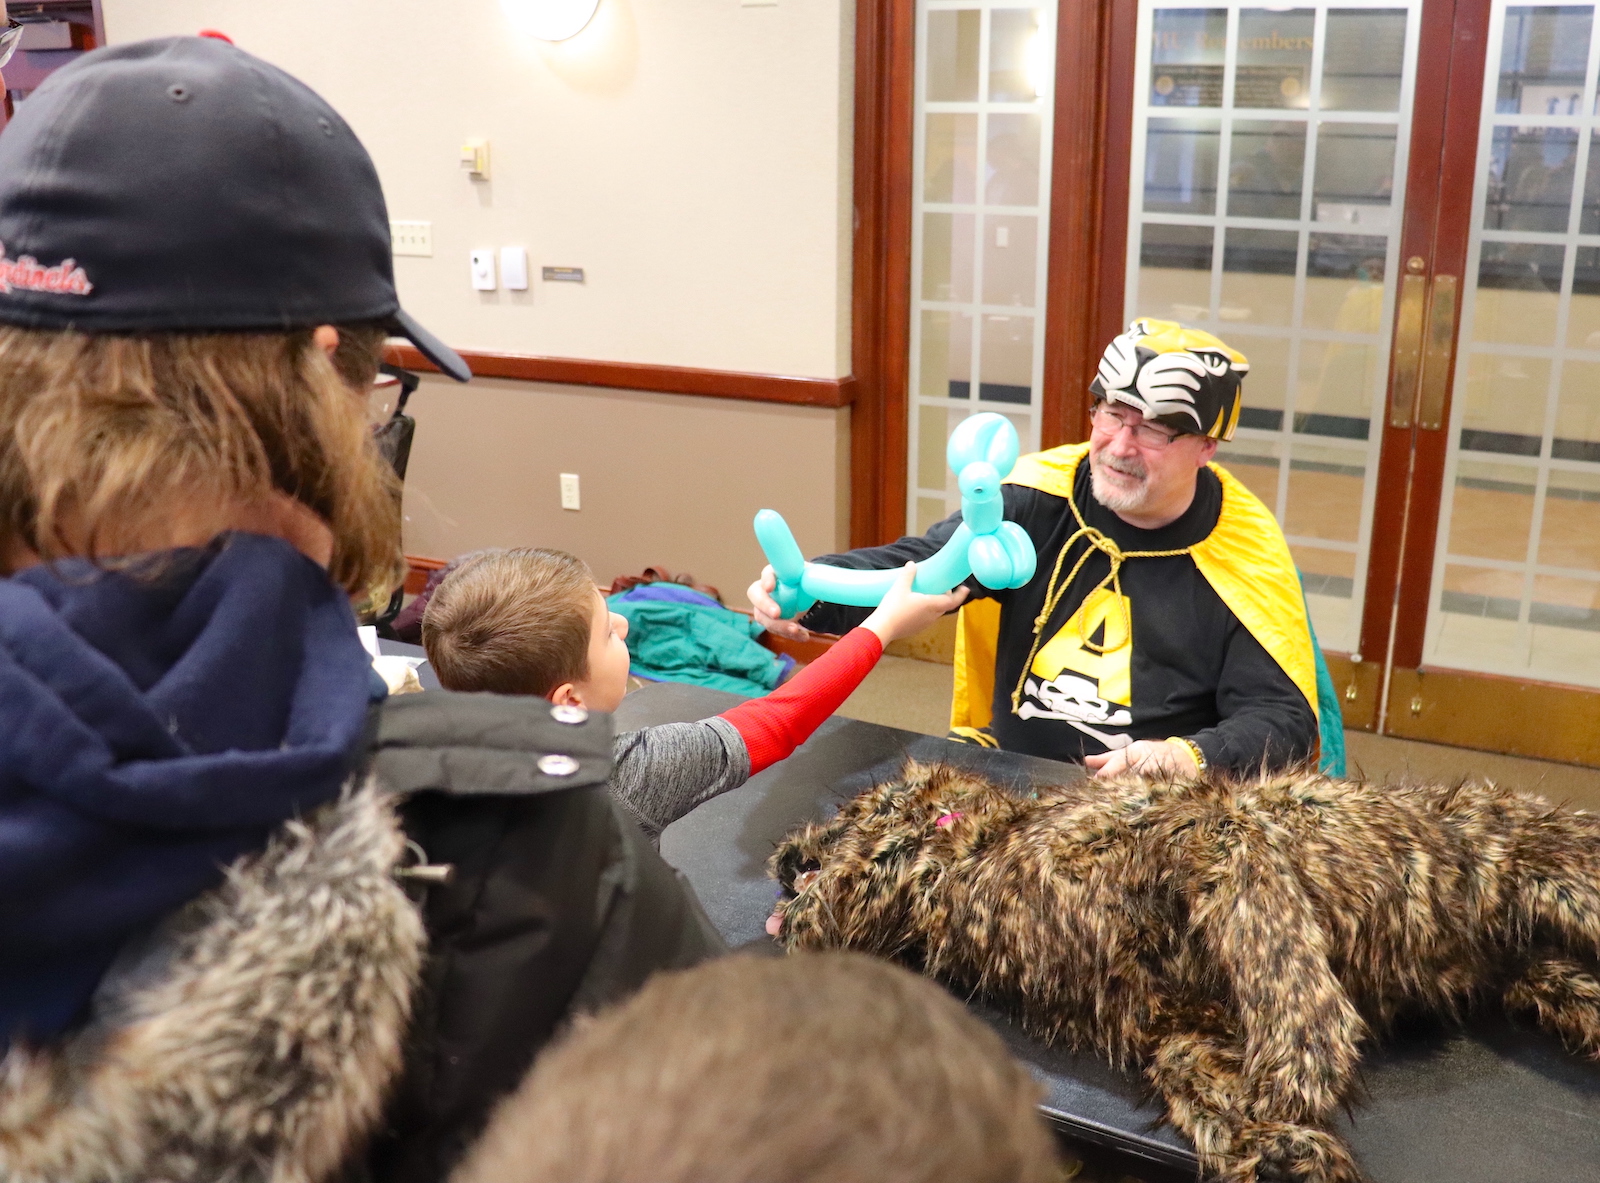 About 600 children and their parents explored University of Missouri science, technology, engineering and math research and creative activity hands-on during the Columbia Young Scientists Expo. Here, a researcher makes balloon animals for children.